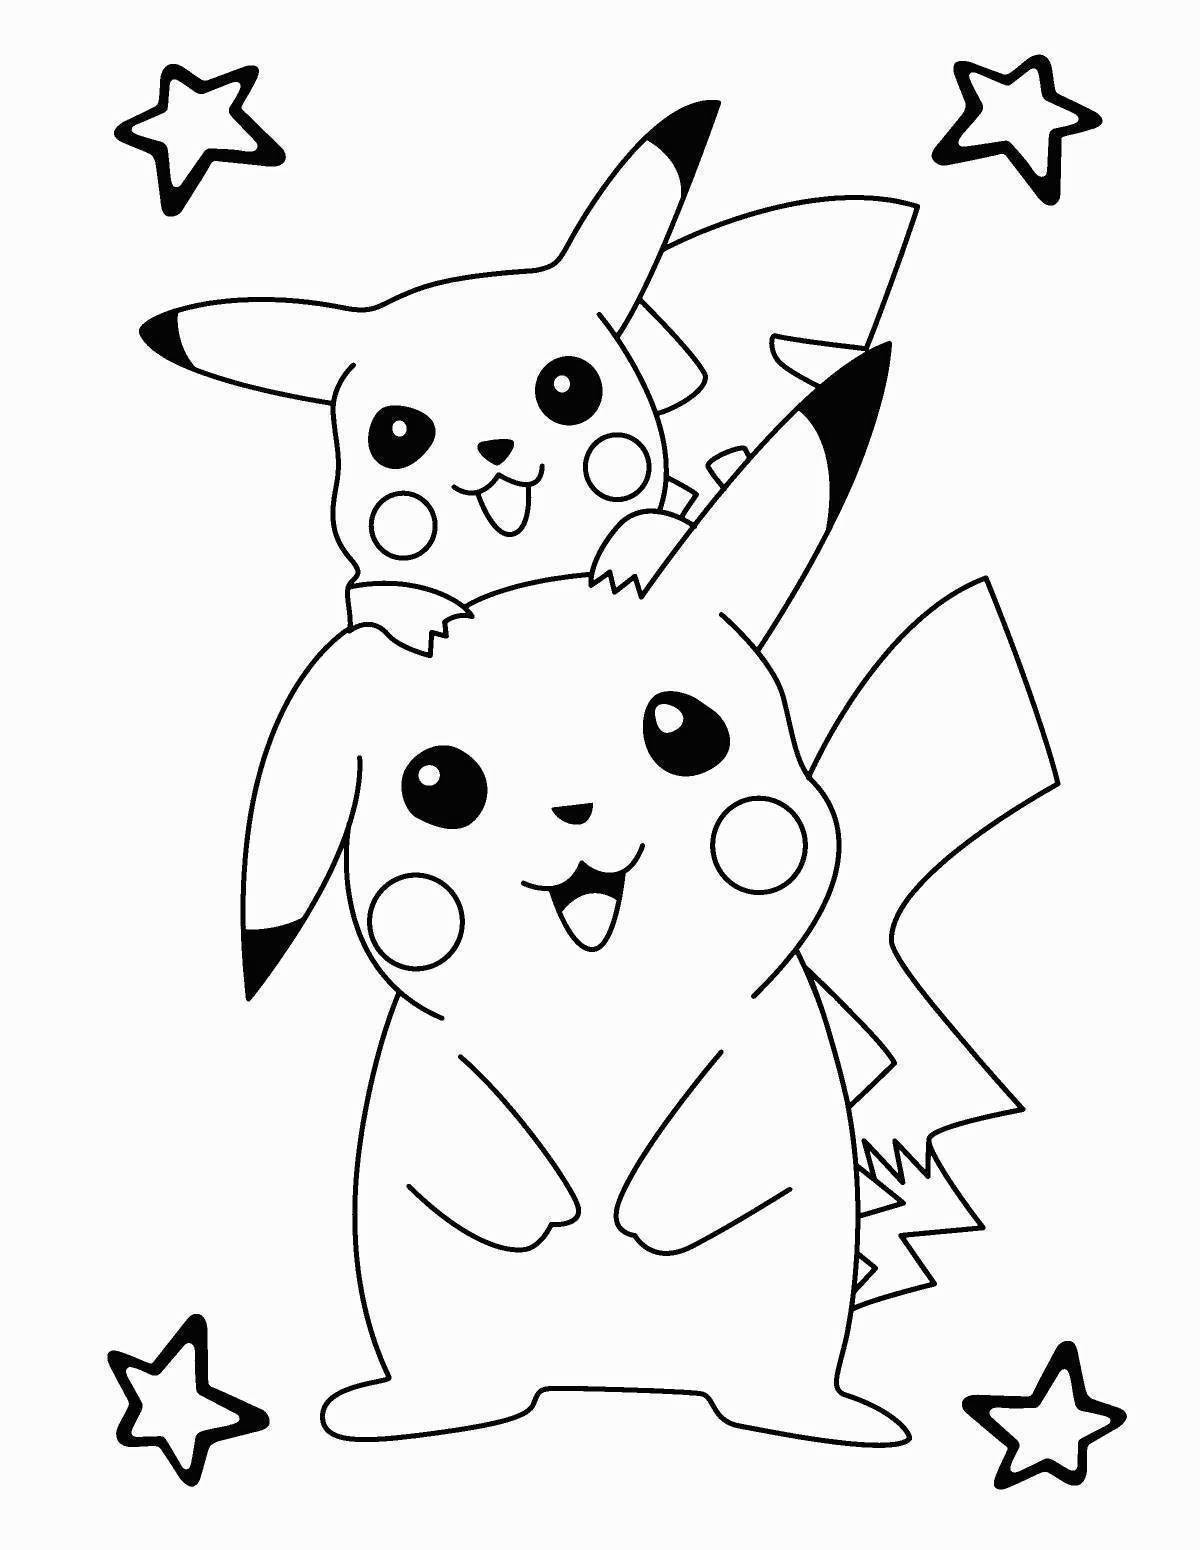 Adorable pikachu coloring book for girls